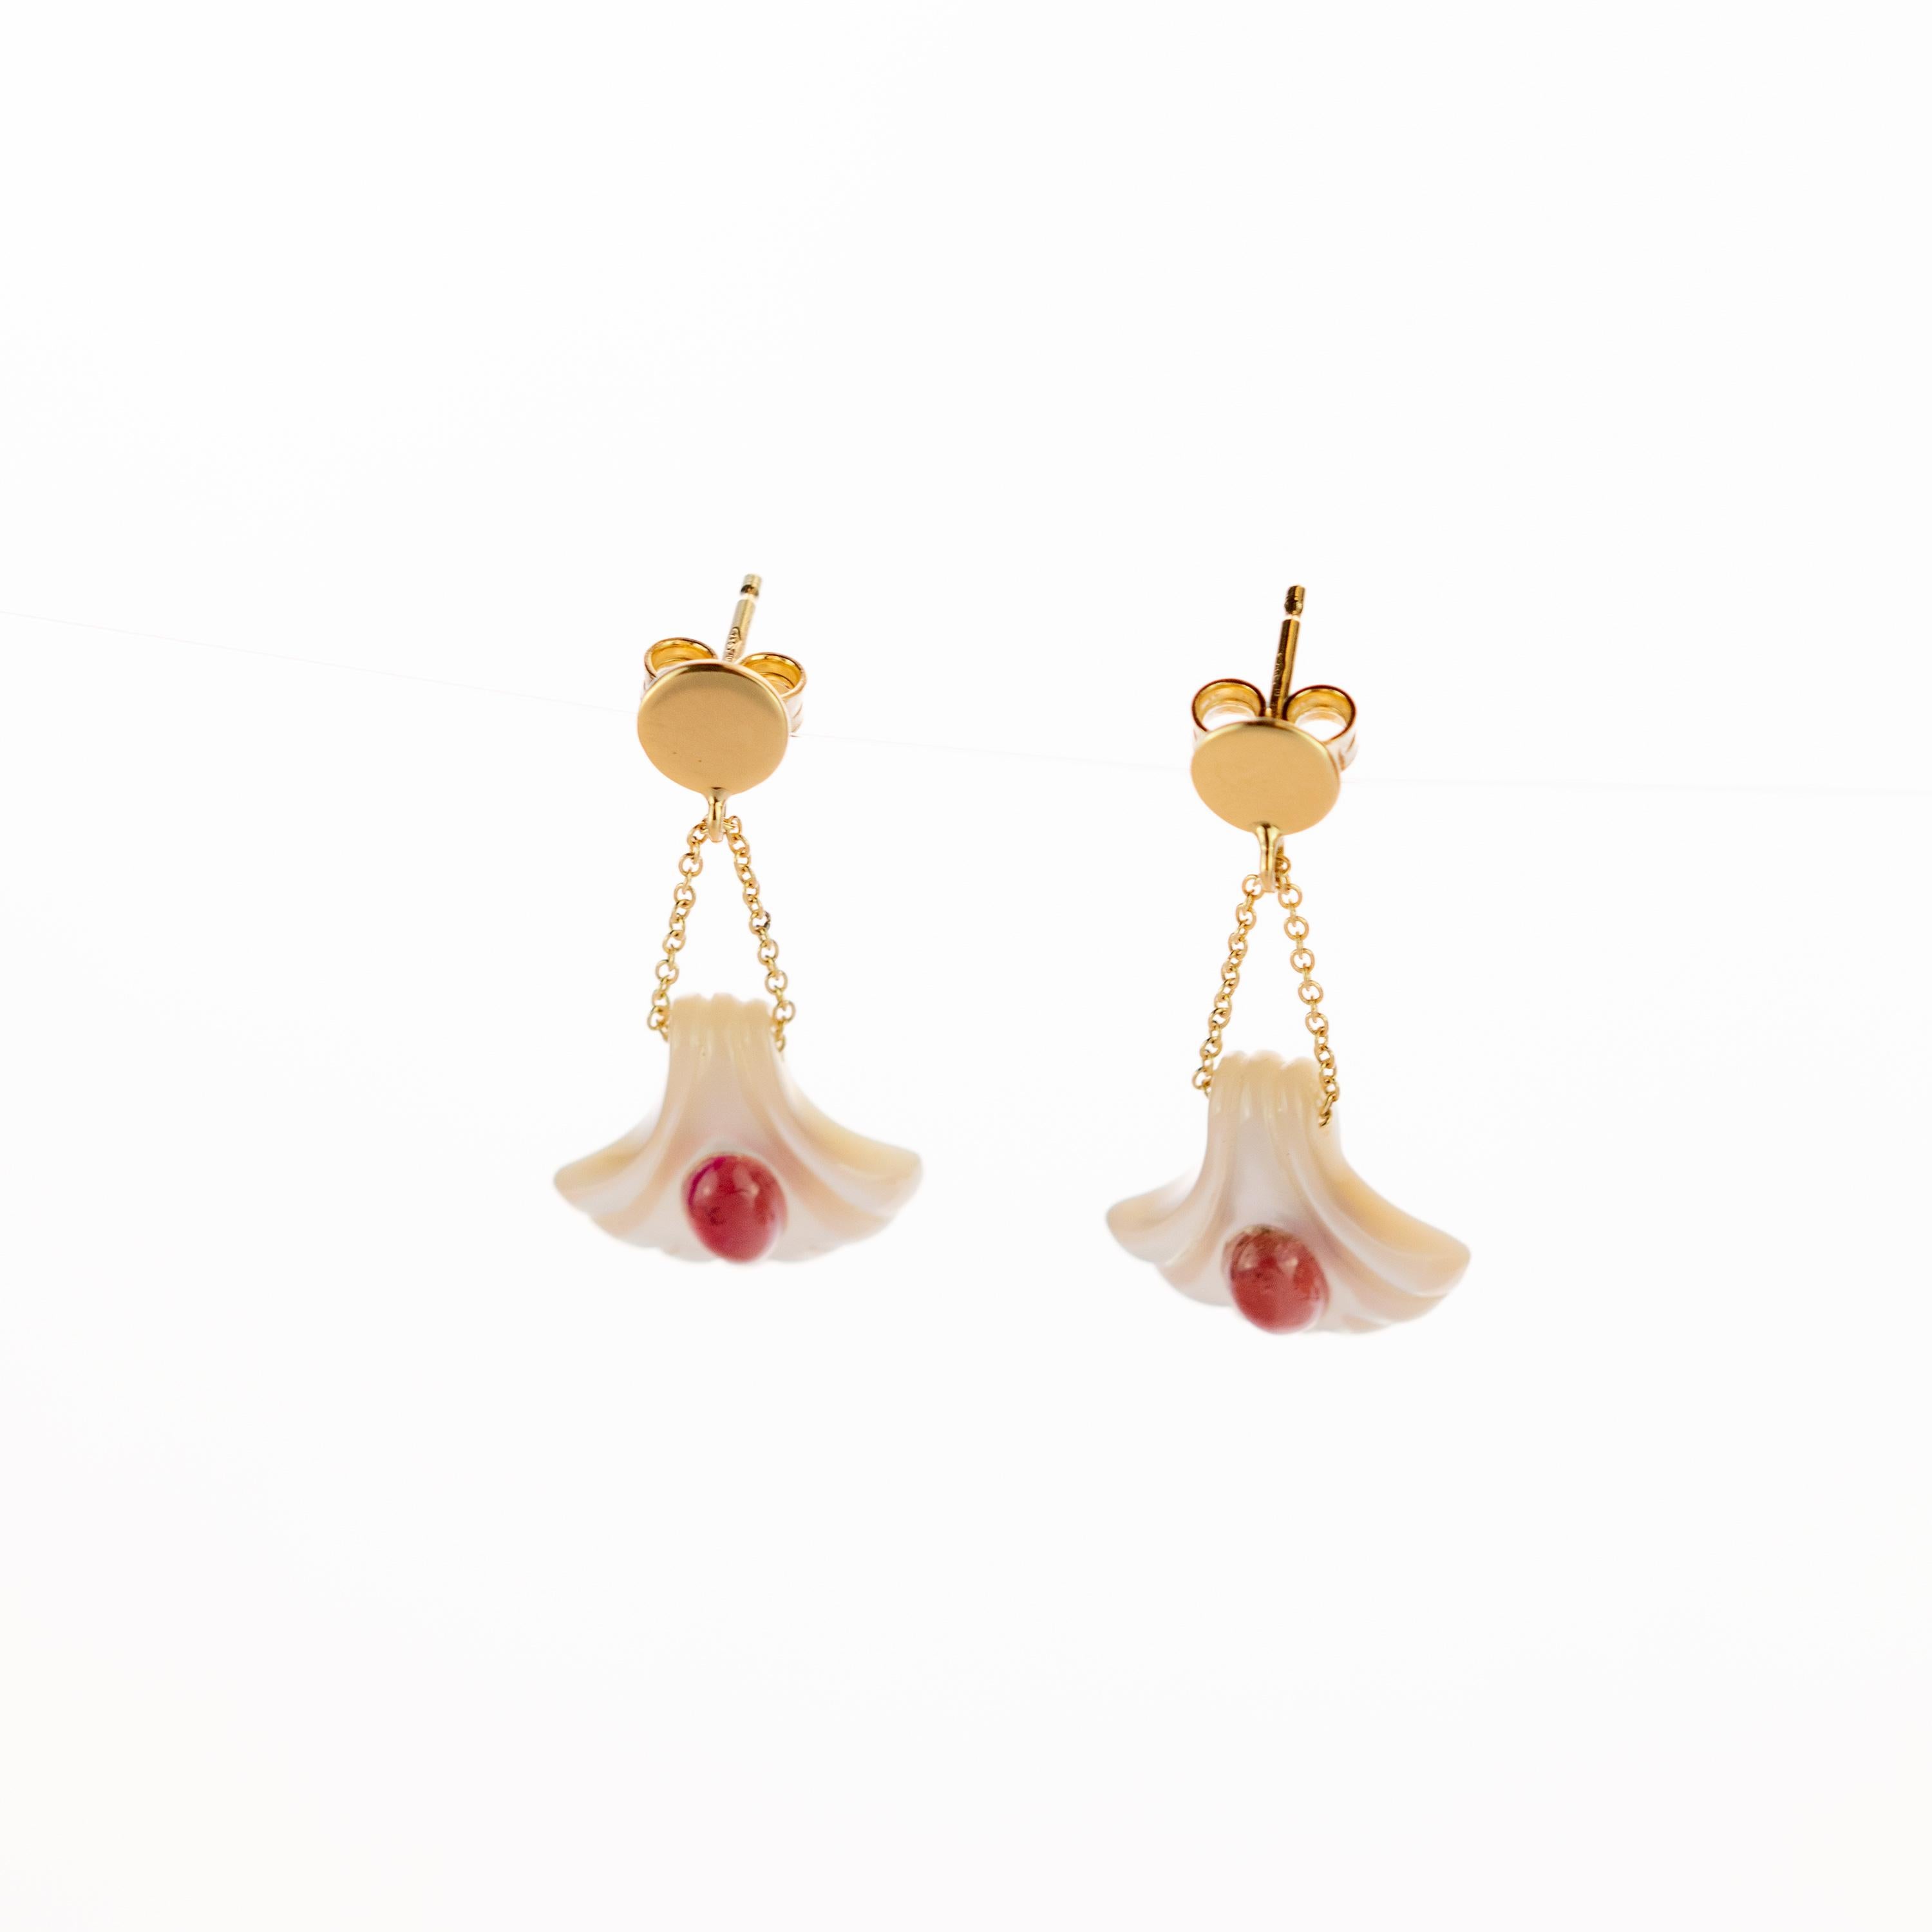 Glamorous earrings with two delicate 18 karat yellow gold chains that start in a gold circle and finish in a beautifully carved mother of pearl shell. To enhance the jewellery an oval natural pink tourmaline is gently added decorating the center of